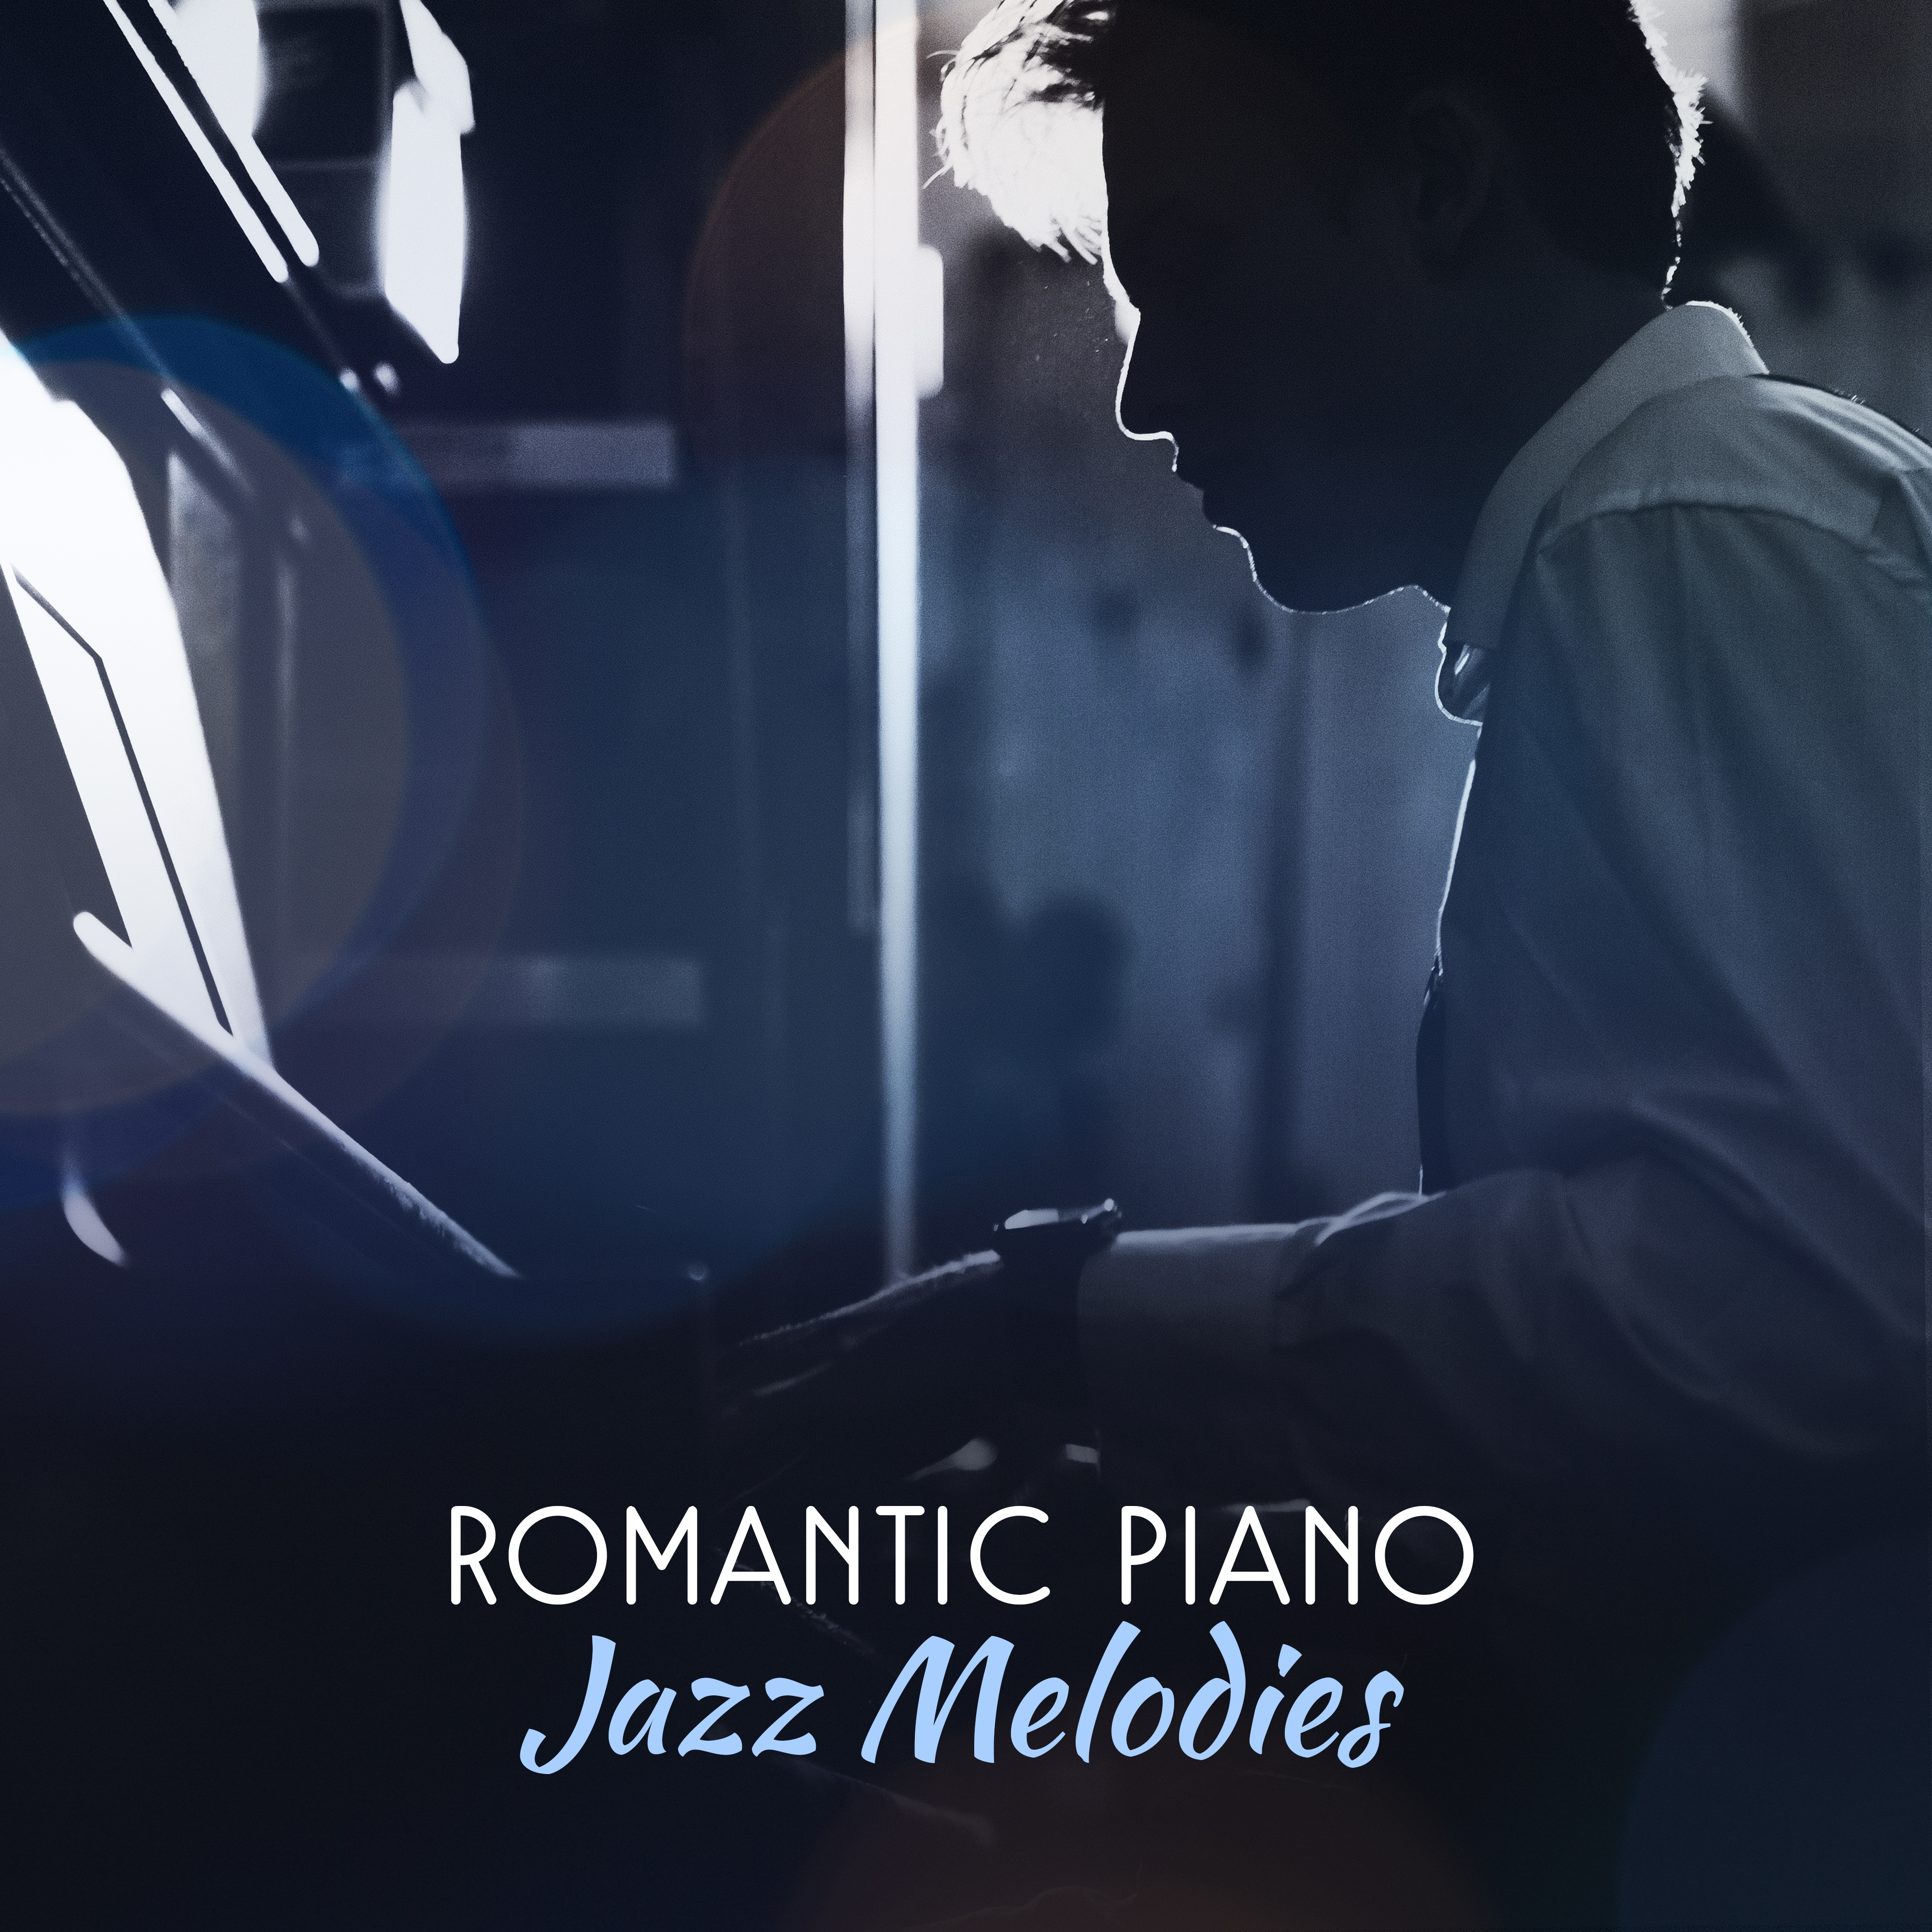 Romantic Piano Jazz Melodies – Smooth Sounds to Relax, Easy Listening, Erotic Evening with Jazz Music